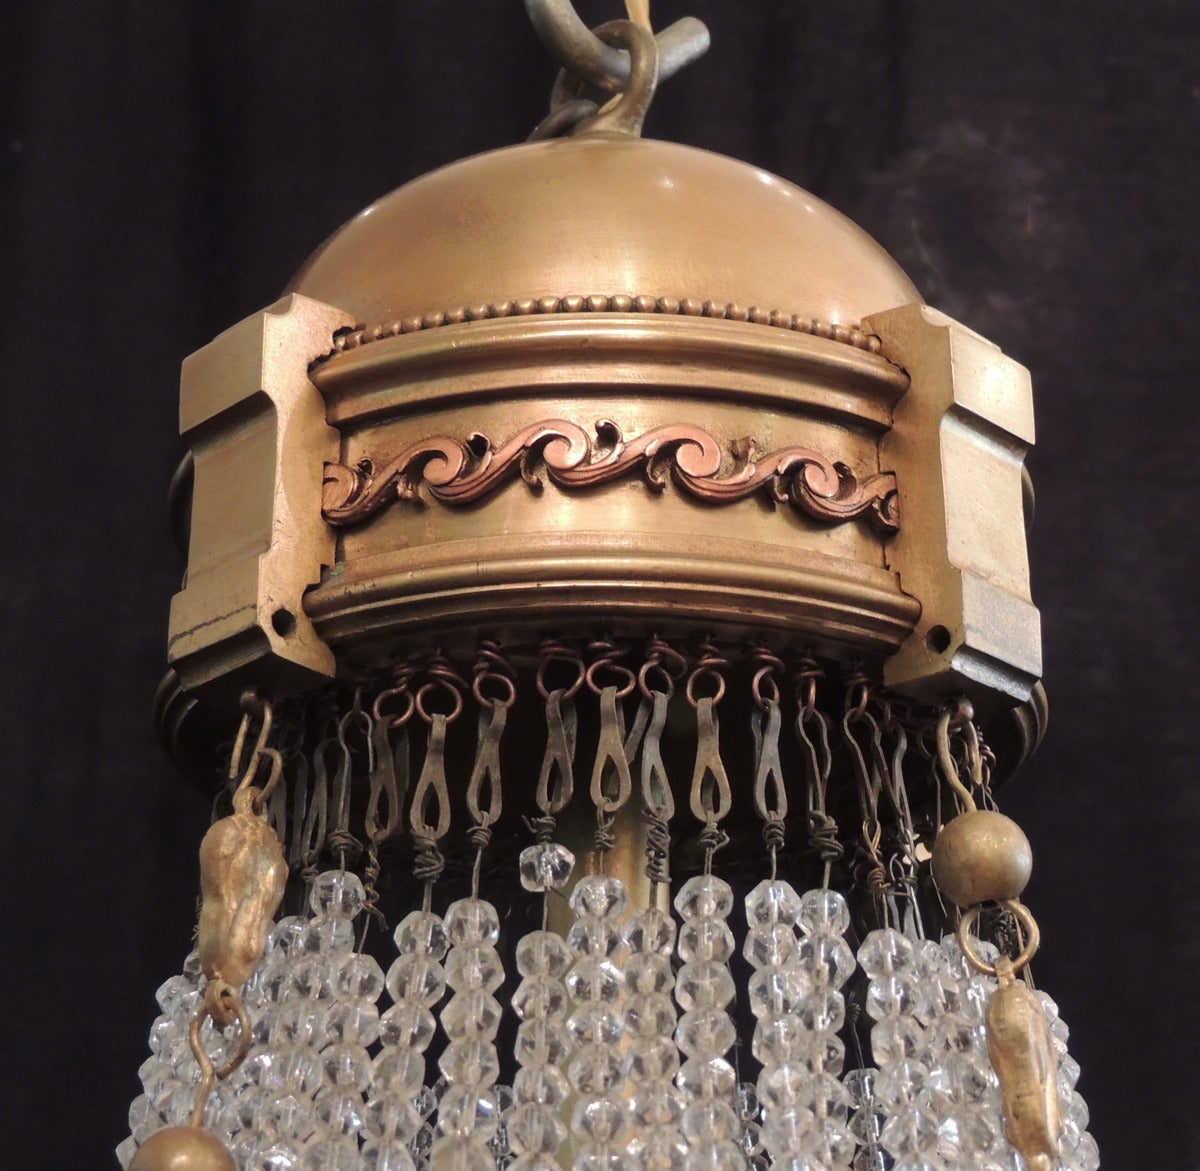 This chandelier was made in France during the first half of the 20th century, circa 1900. This empire style fixture has a bronze dome top with an S scroll border with many hanging fastened crystal chains and three bronze chains. The two types of